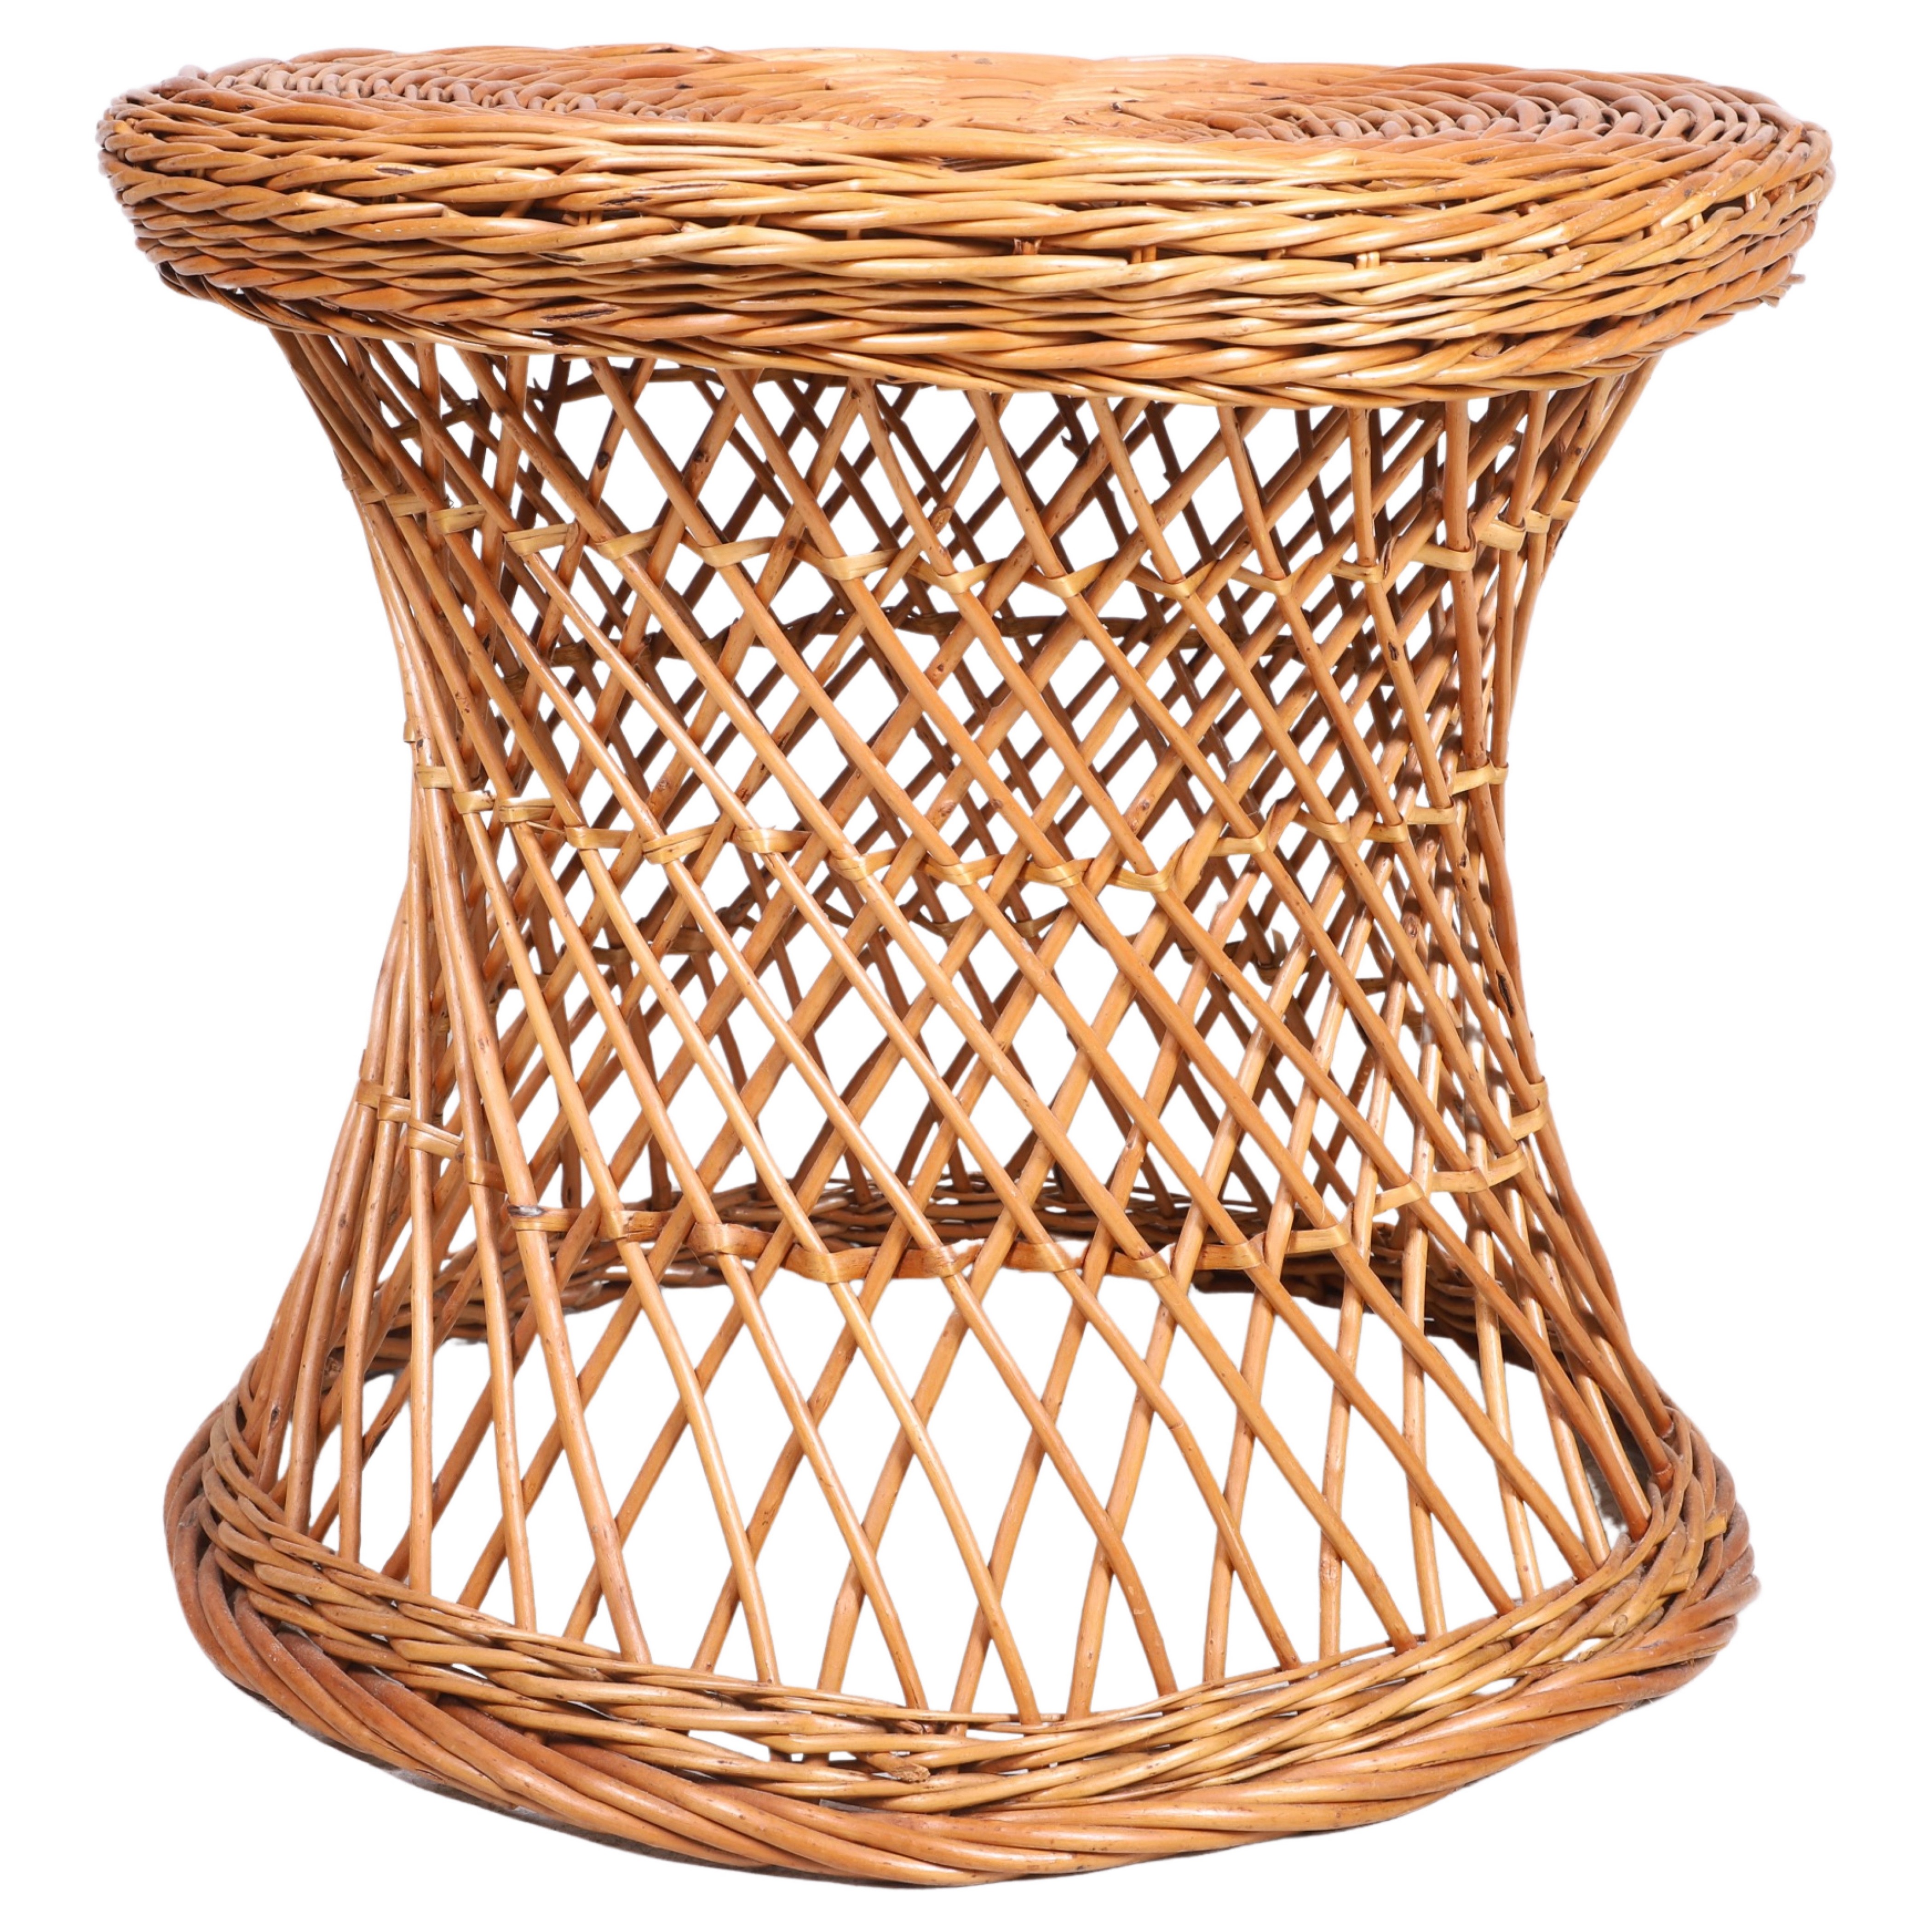 Wicker side table, round top, 19-3/4h